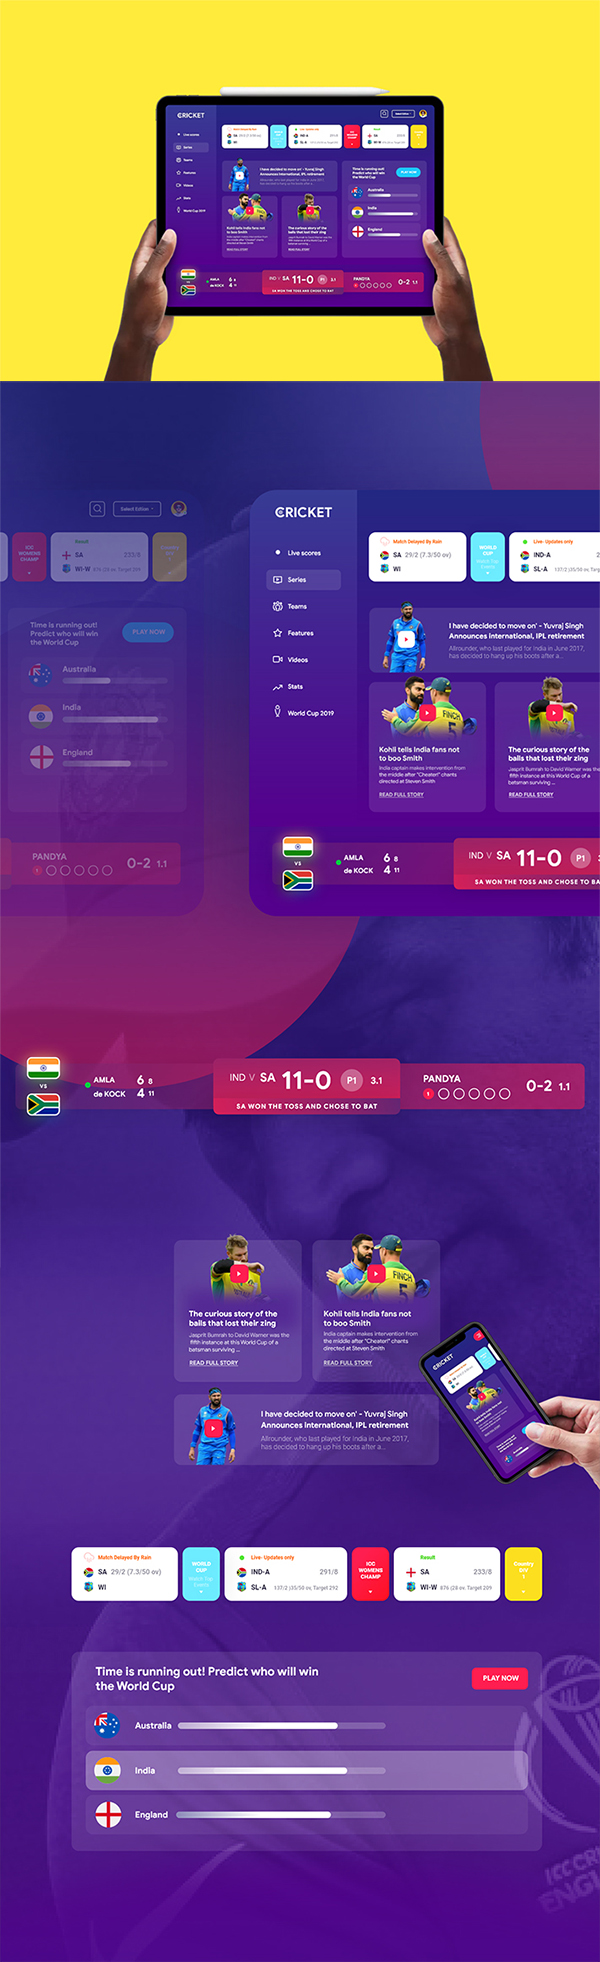 Free Download Awesome ICC Cricket World Cup App Ui (2019)